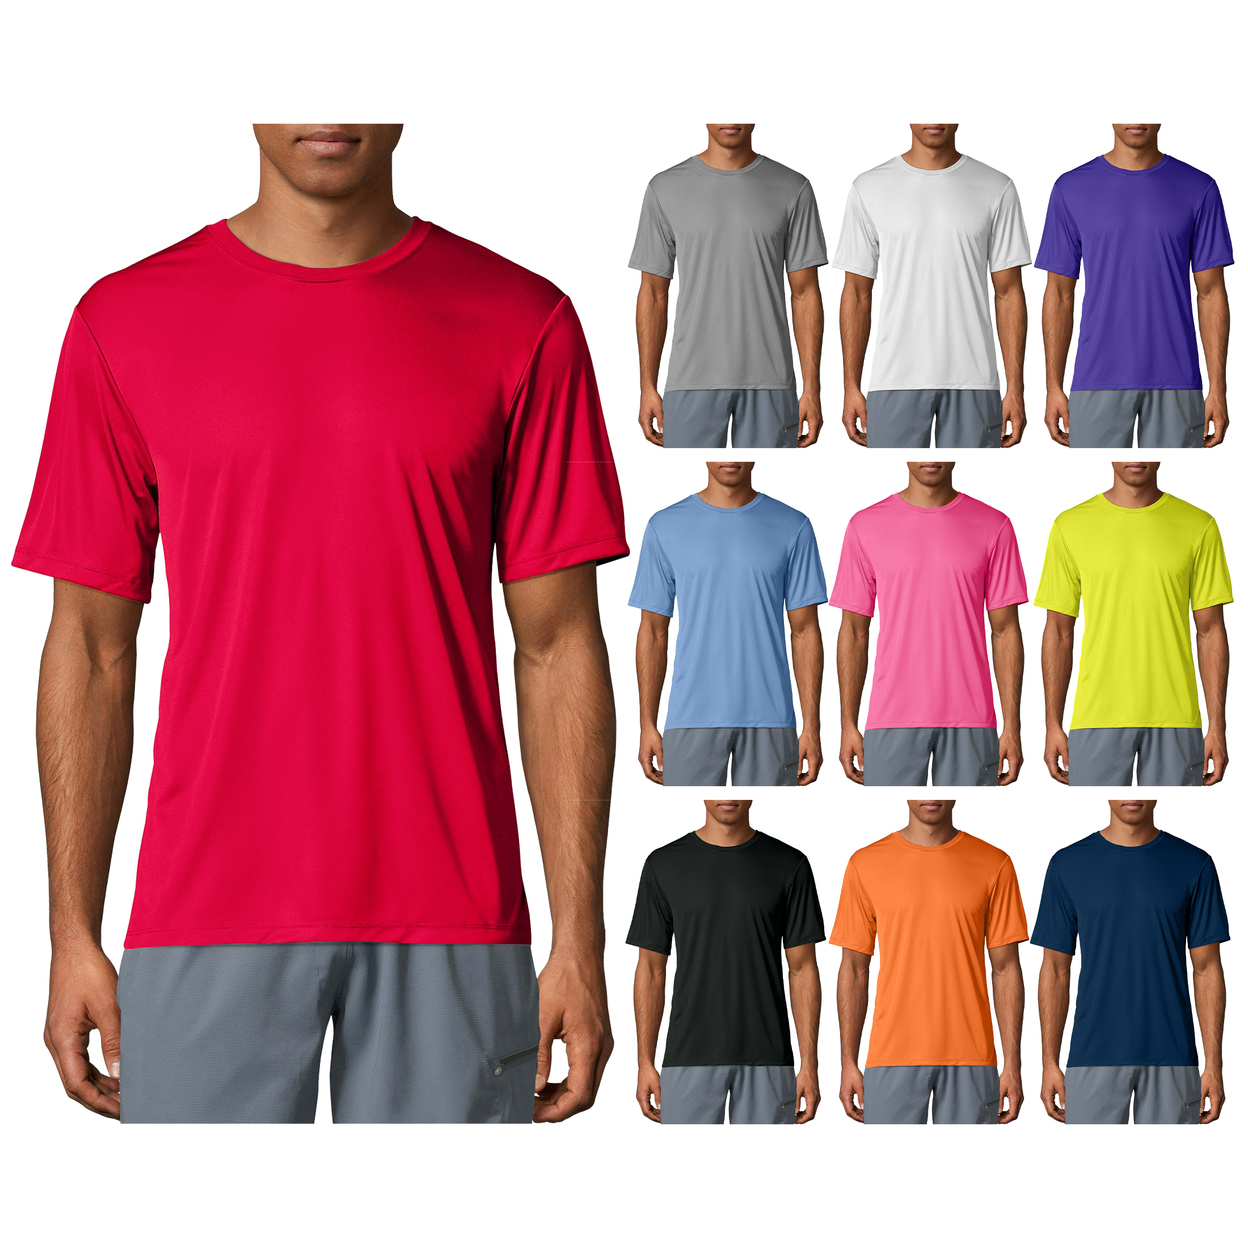 3-Pack: Men's Moisture Wicking Cool Dri-Fit Performance Short Sleeve Crew Neck T-Shirts - Small